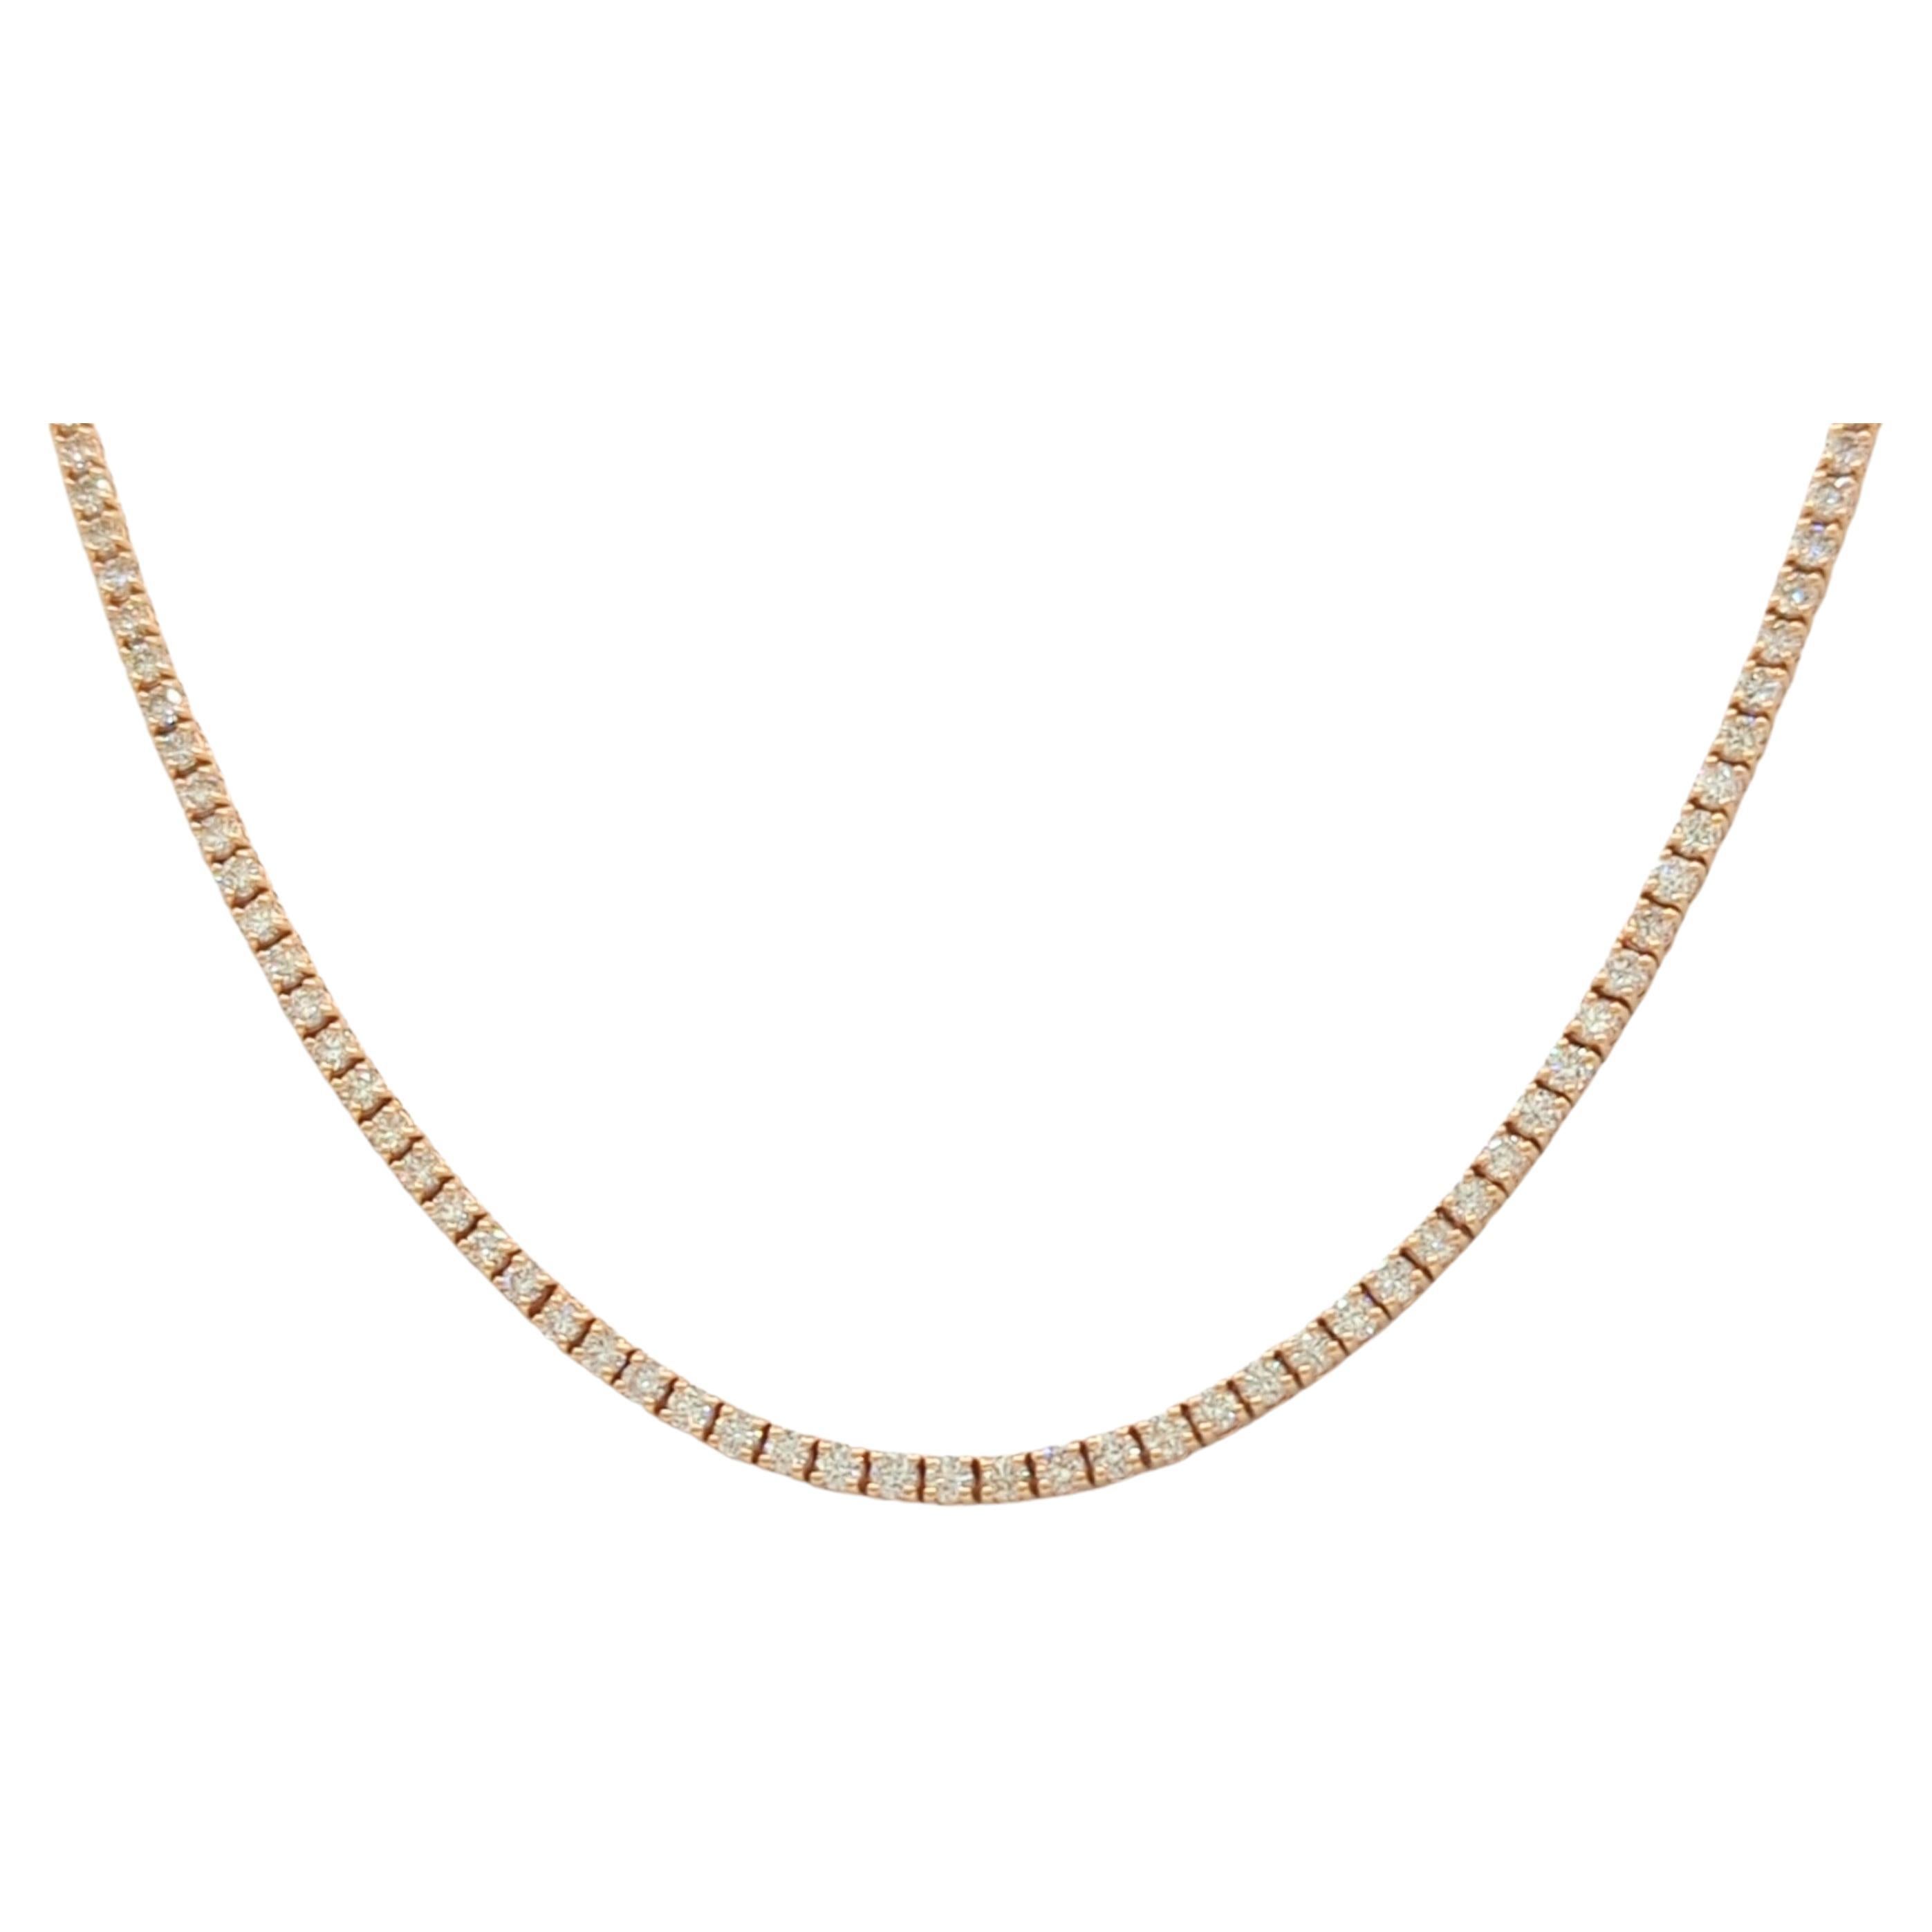 White Diamond Tennis Necklace in 14K Rose Gold